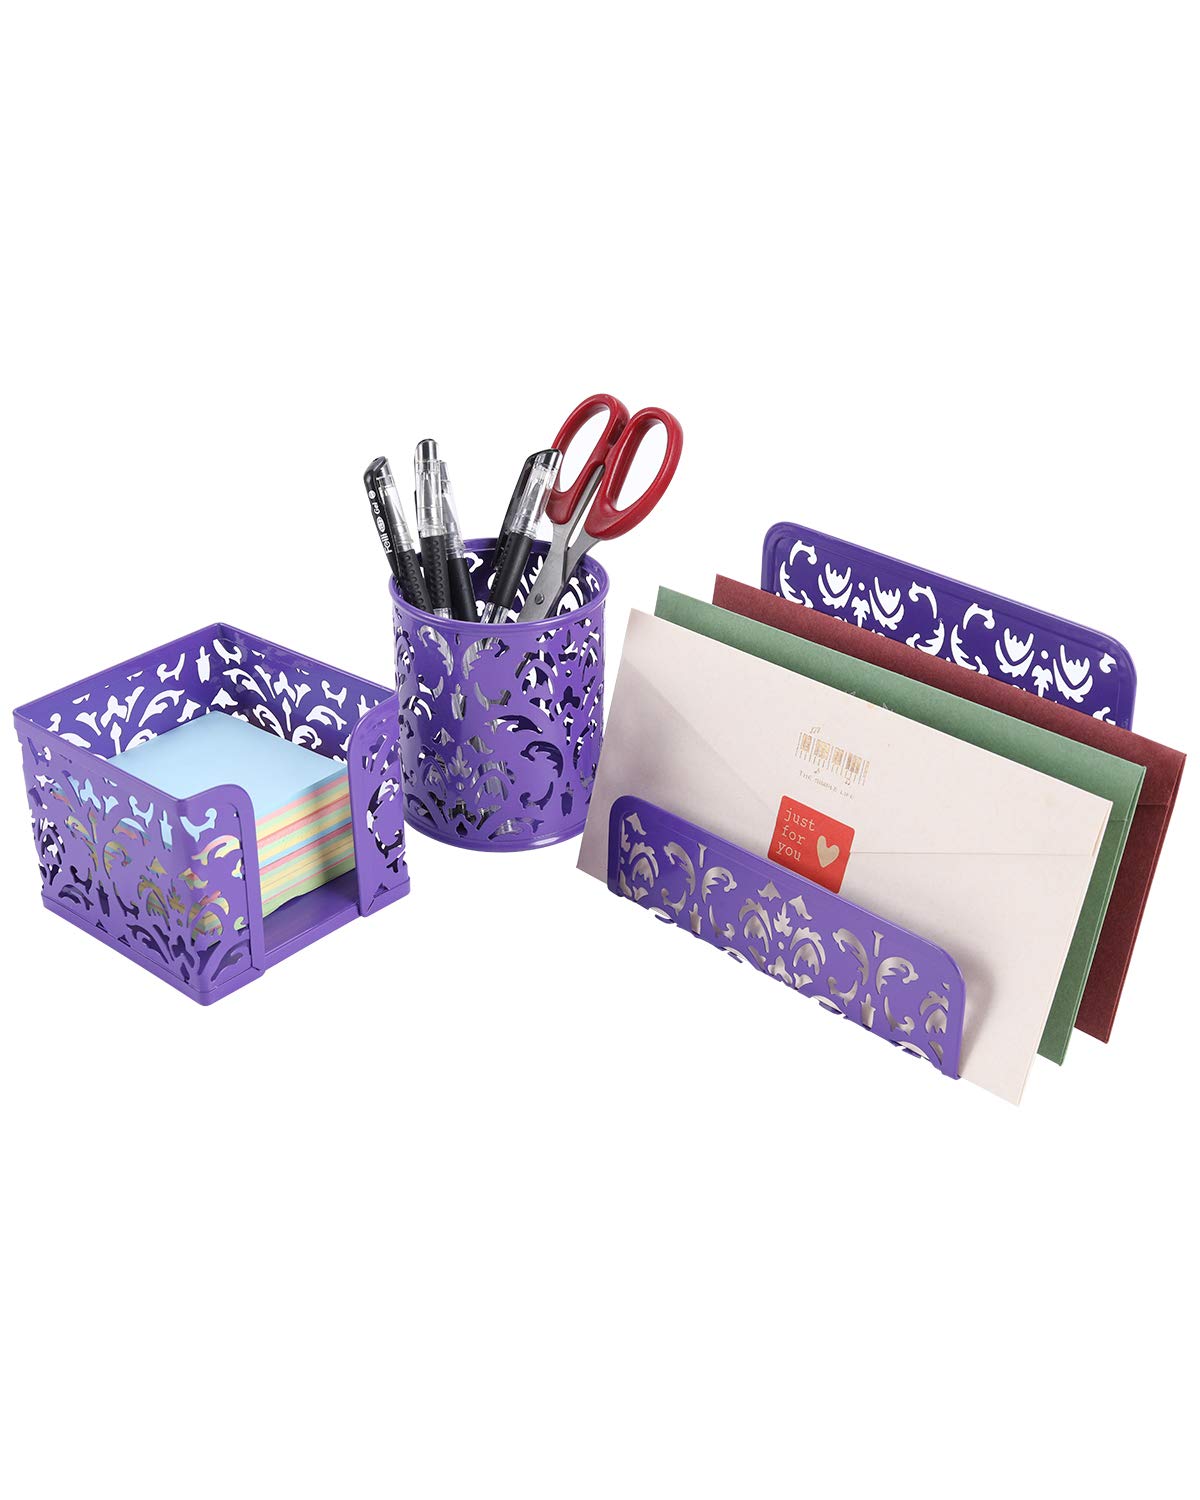 Book Cover EasyPAG Cute Office Supplies 3 Piece Desk Organizer and Accessories Set - Letter Sorter, Pen Holder,Sticky Notes Holder,Purple